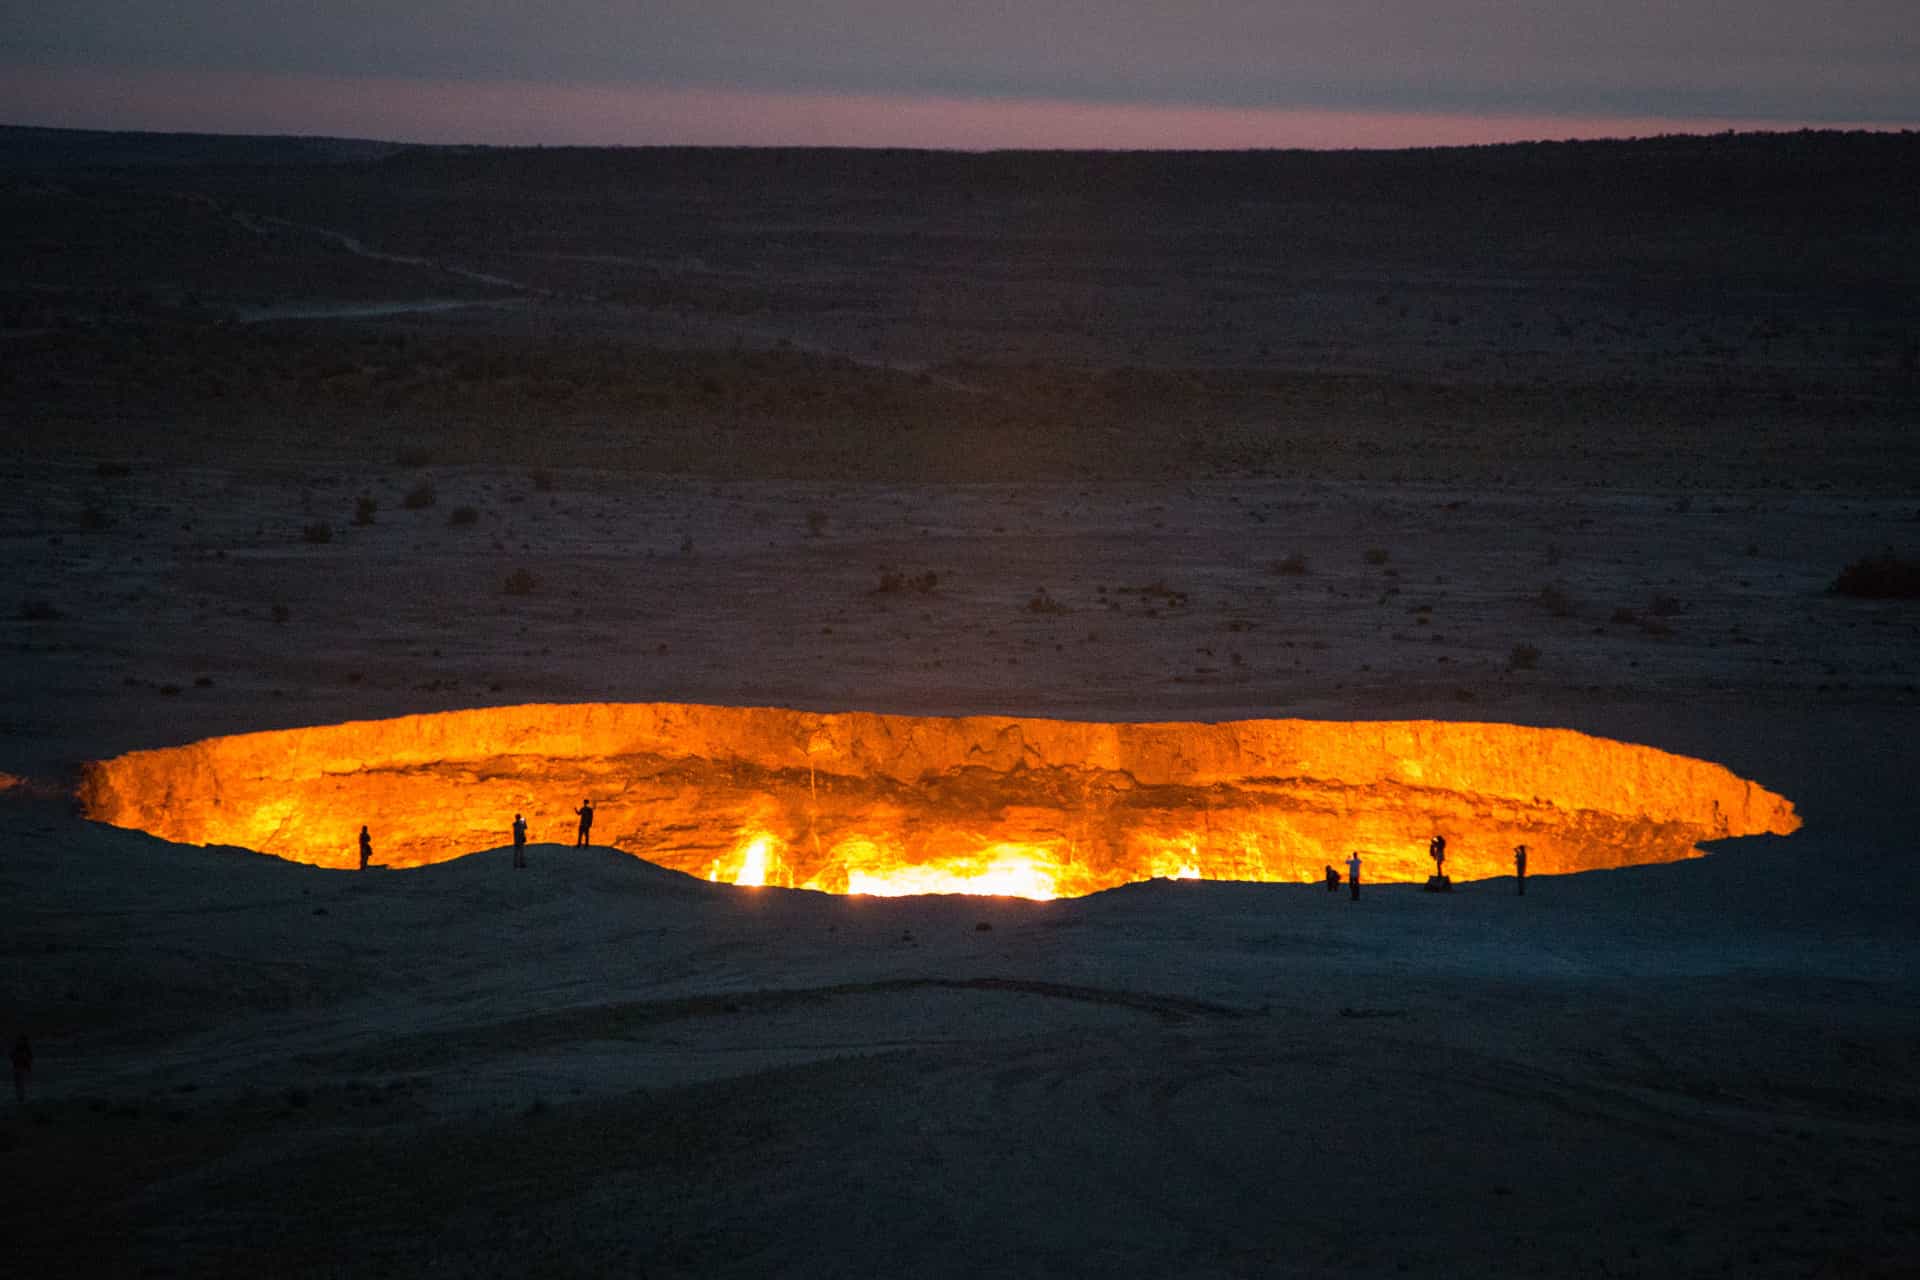 Why you should go: The nation is an ancient land of great spirituality, tradition, and natural beauty. Its most famous attraction is the Darvaza gas crater (pictured), also known as the "Door to Hell" or ''Gates of Hell." This natural gas field collapsed into an underground cavern when geologists set it on fire. It alone is worth the trip.